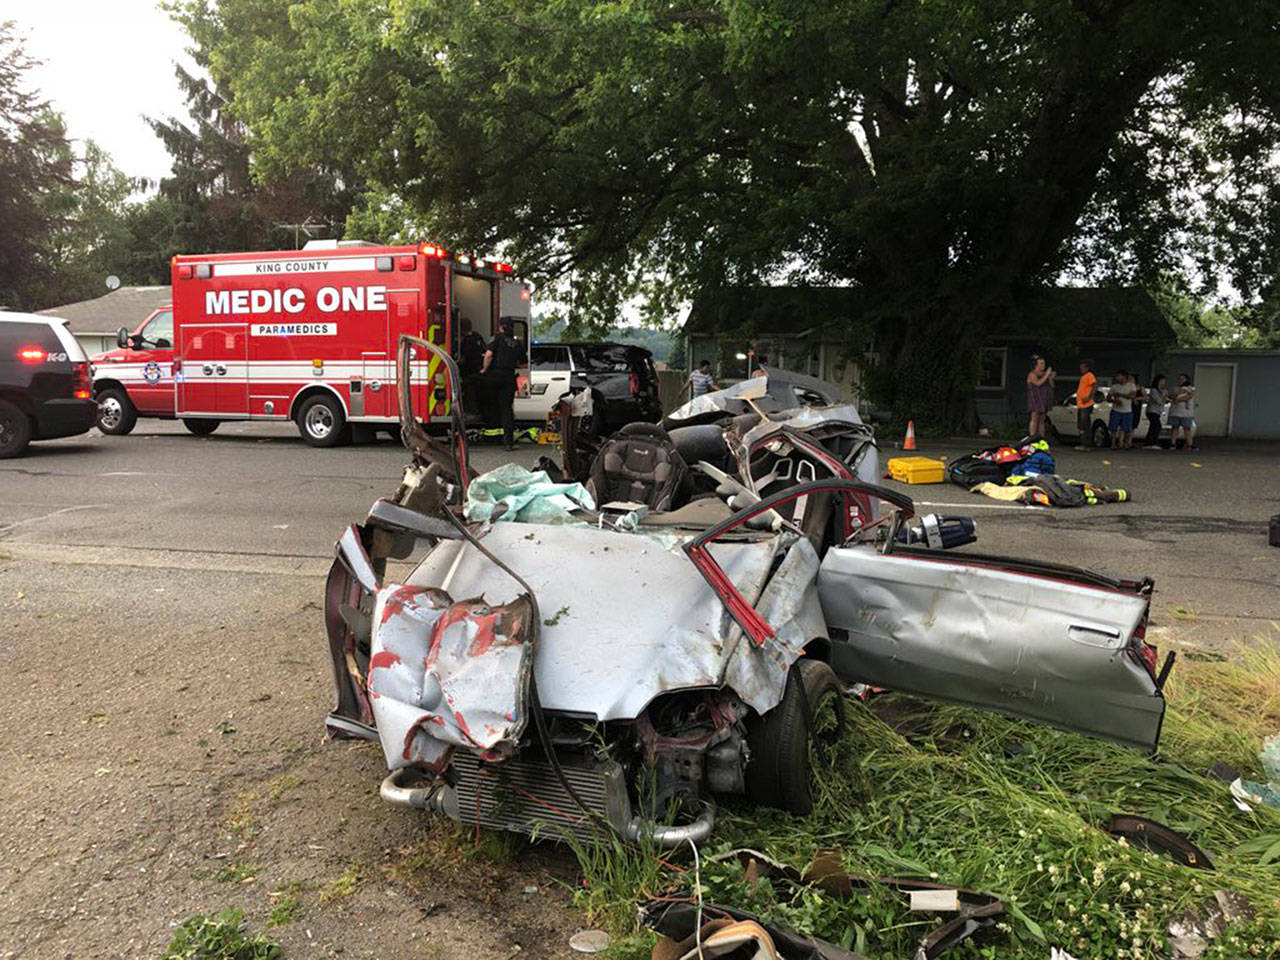 A 30-year-old Kent man was injured in a high-speed, single-car crash May 28 in the 5200 block of South 212th Street. COURTESY PHOTO, Puget Sound Fire